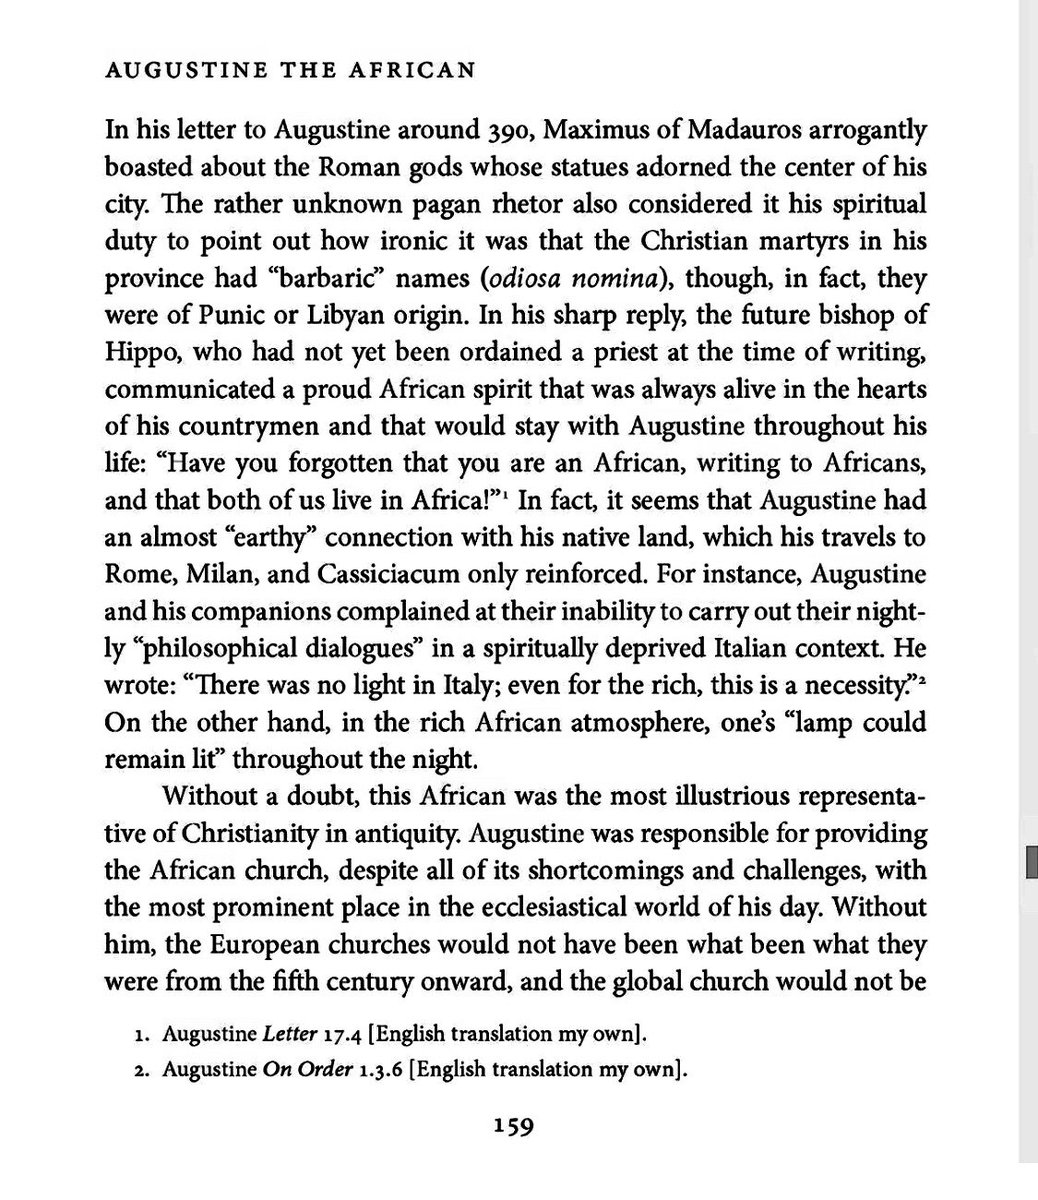 "Rome this, Rome that".. Gus must've gotten tired of hearing it.“Have you forgotten (NEGRO) that you are an AFRICAN, writing to AFRICANS, and that both of us live in Africa!”— St. Augustine of Hippo